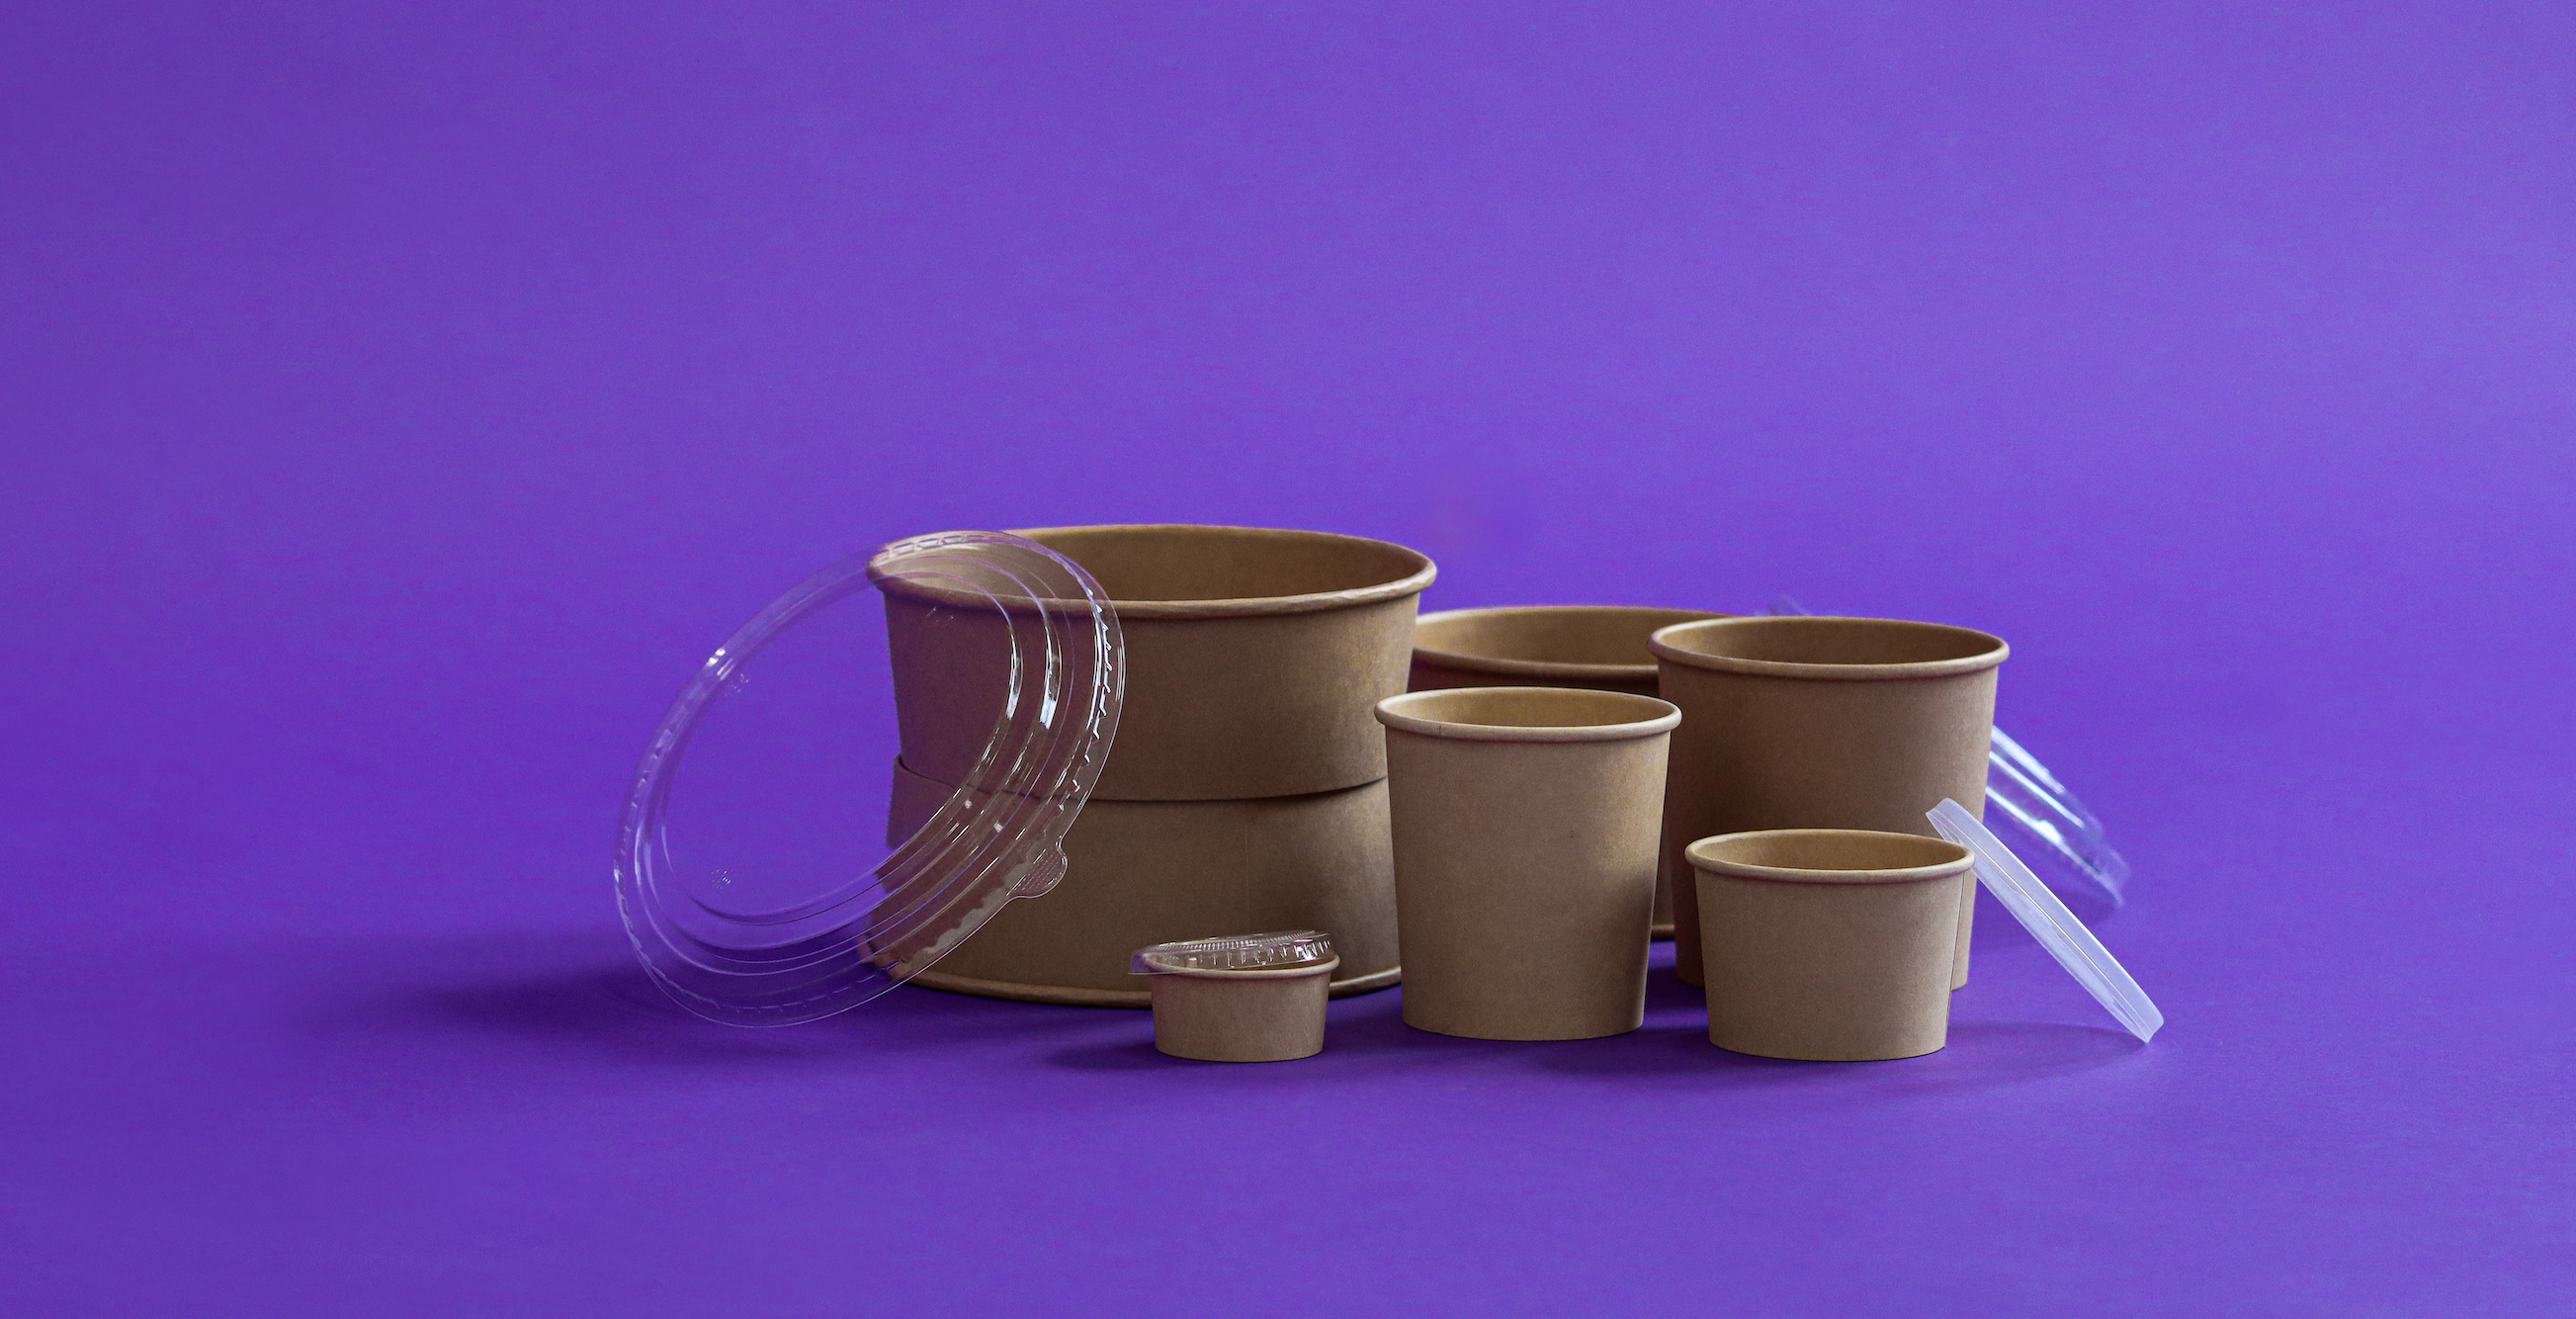 The image showcases an array of Kraft paper food containers with clear plastic lids, some open, containing bananas and a lemon on a vibrant purple background, suggesting themes of sustainable food packaging and takeaway.